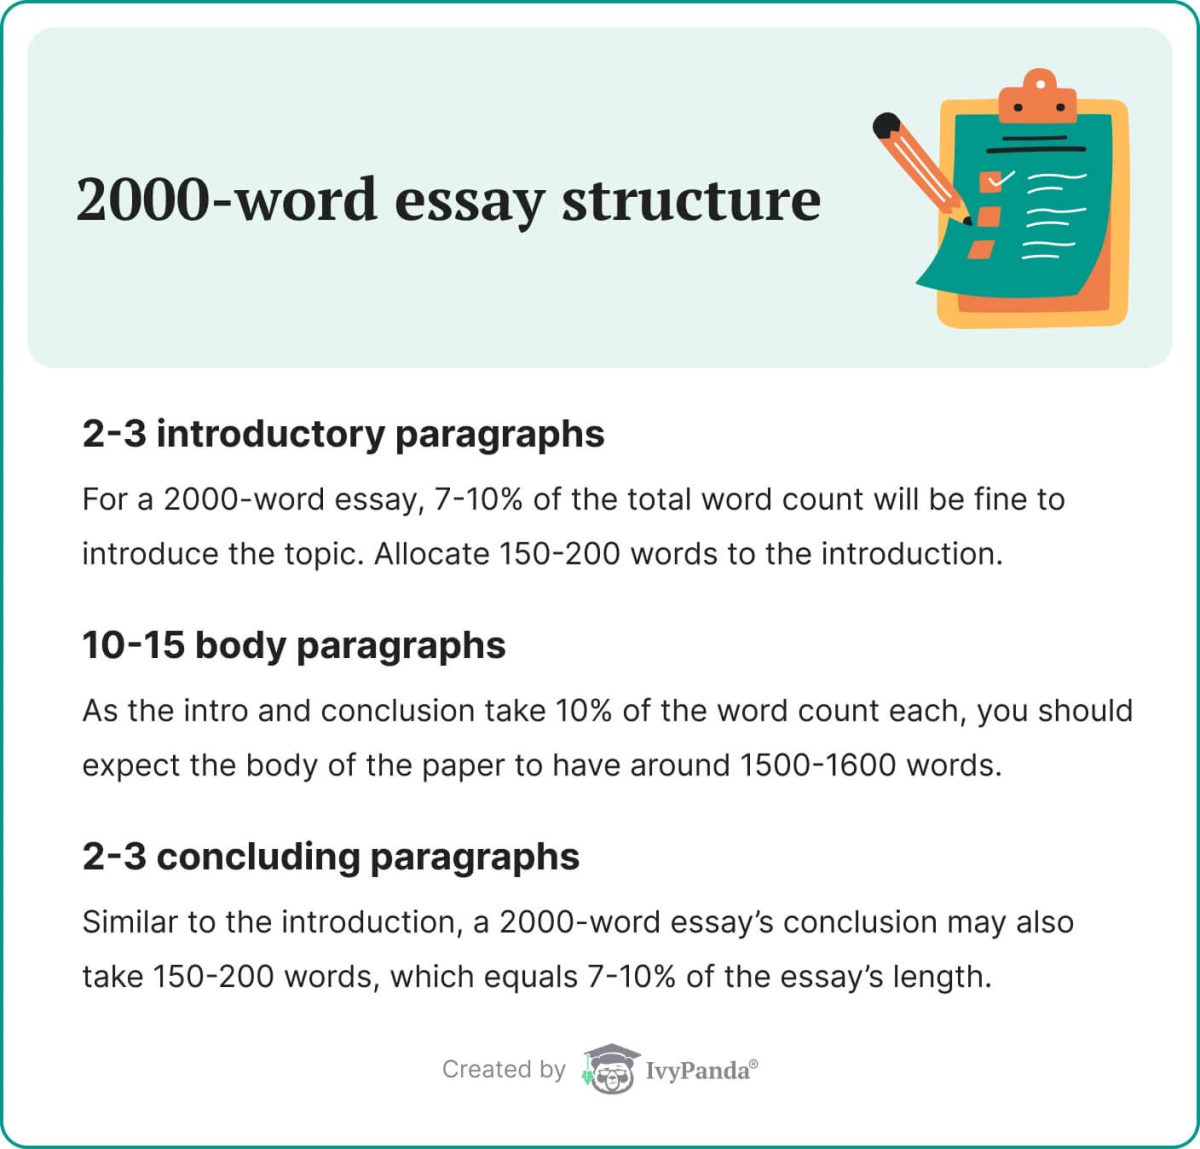 The picture displays the elements of 2000-word essay structure.